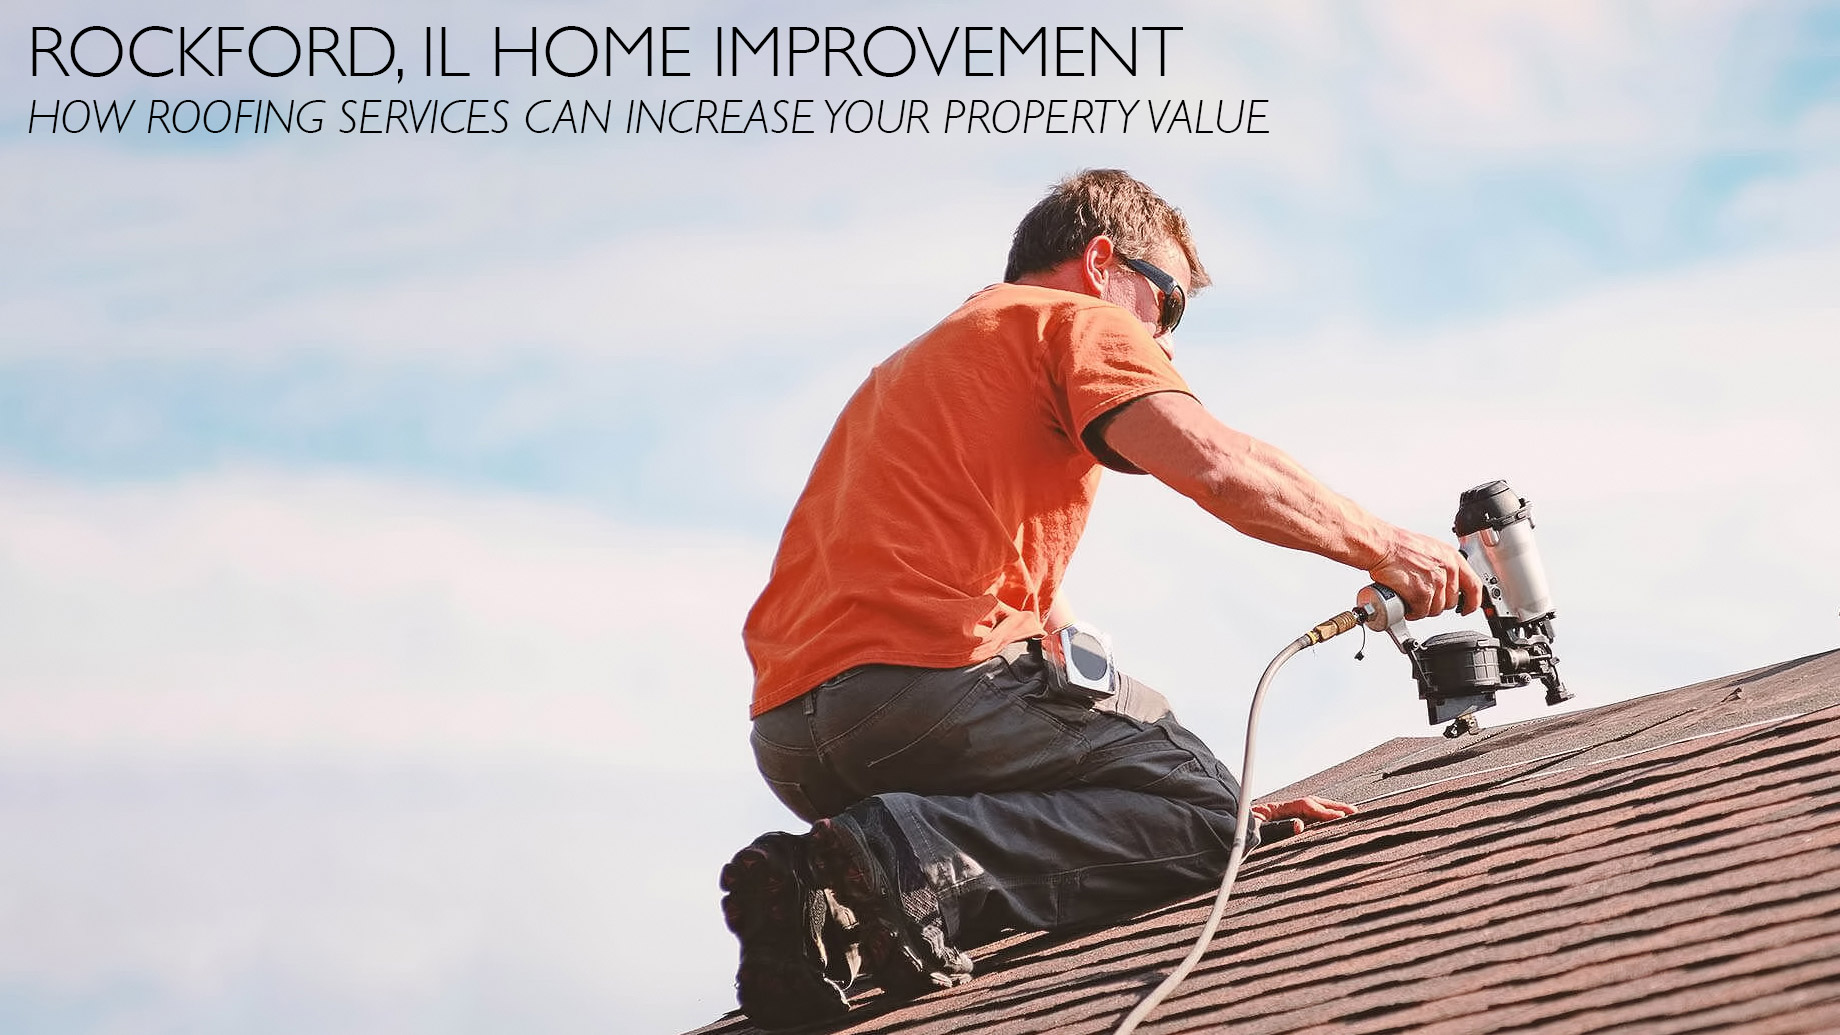 Rockford, IL Home Improvement - How Roofing Services Can Increase Your Property Value